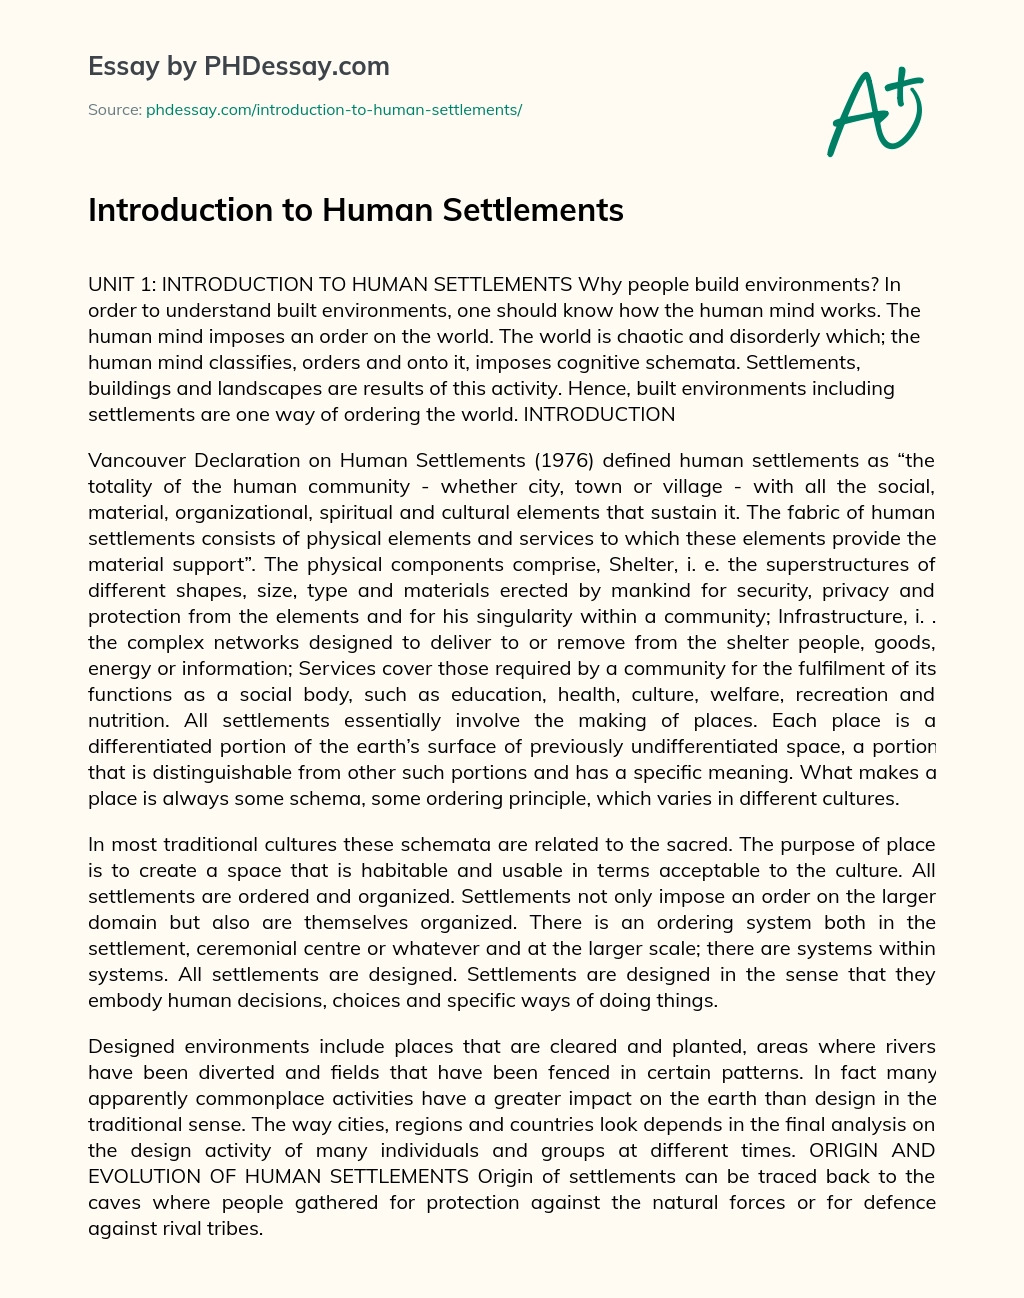 Introduction to Human Settlements essay